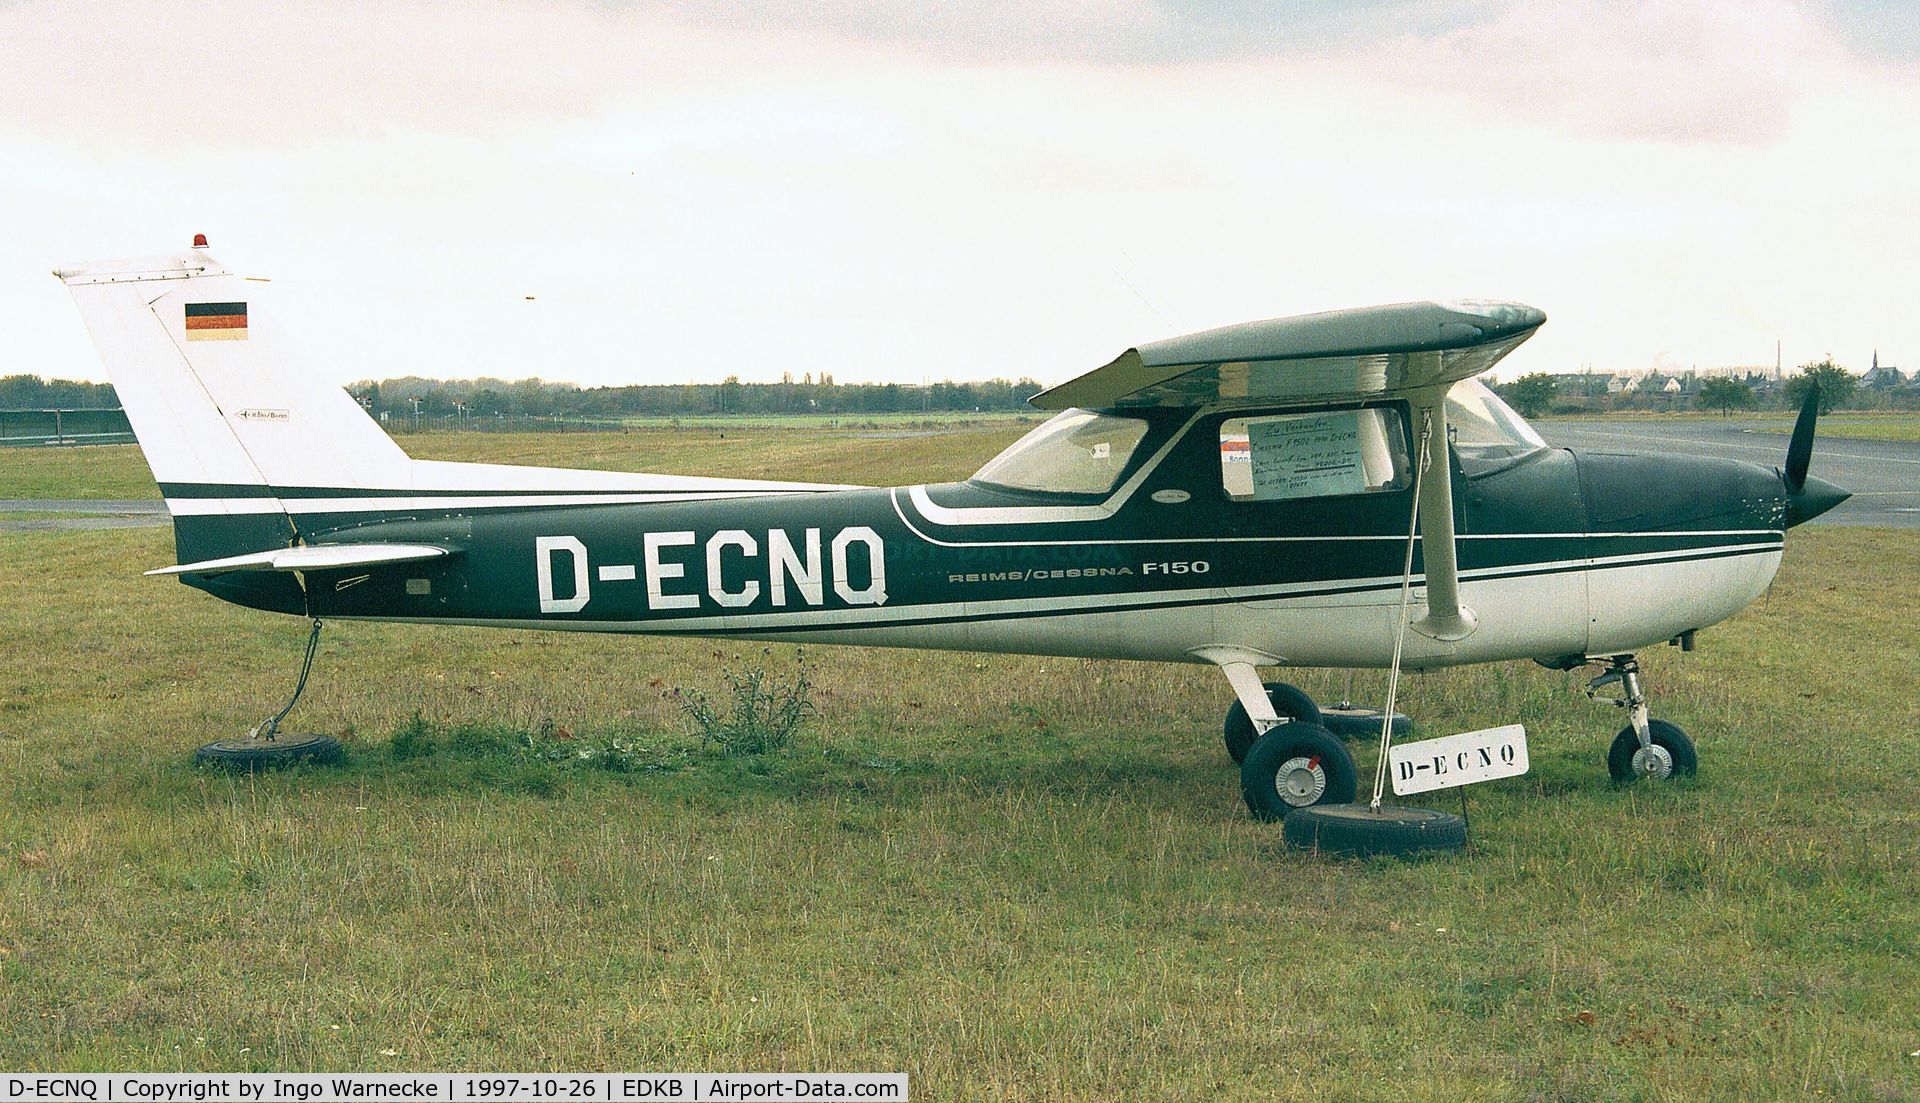 D-ECNQ, Reims F150L C/N 0659, Cessna (Reims) F150L at Bonn-Hangelar airfield